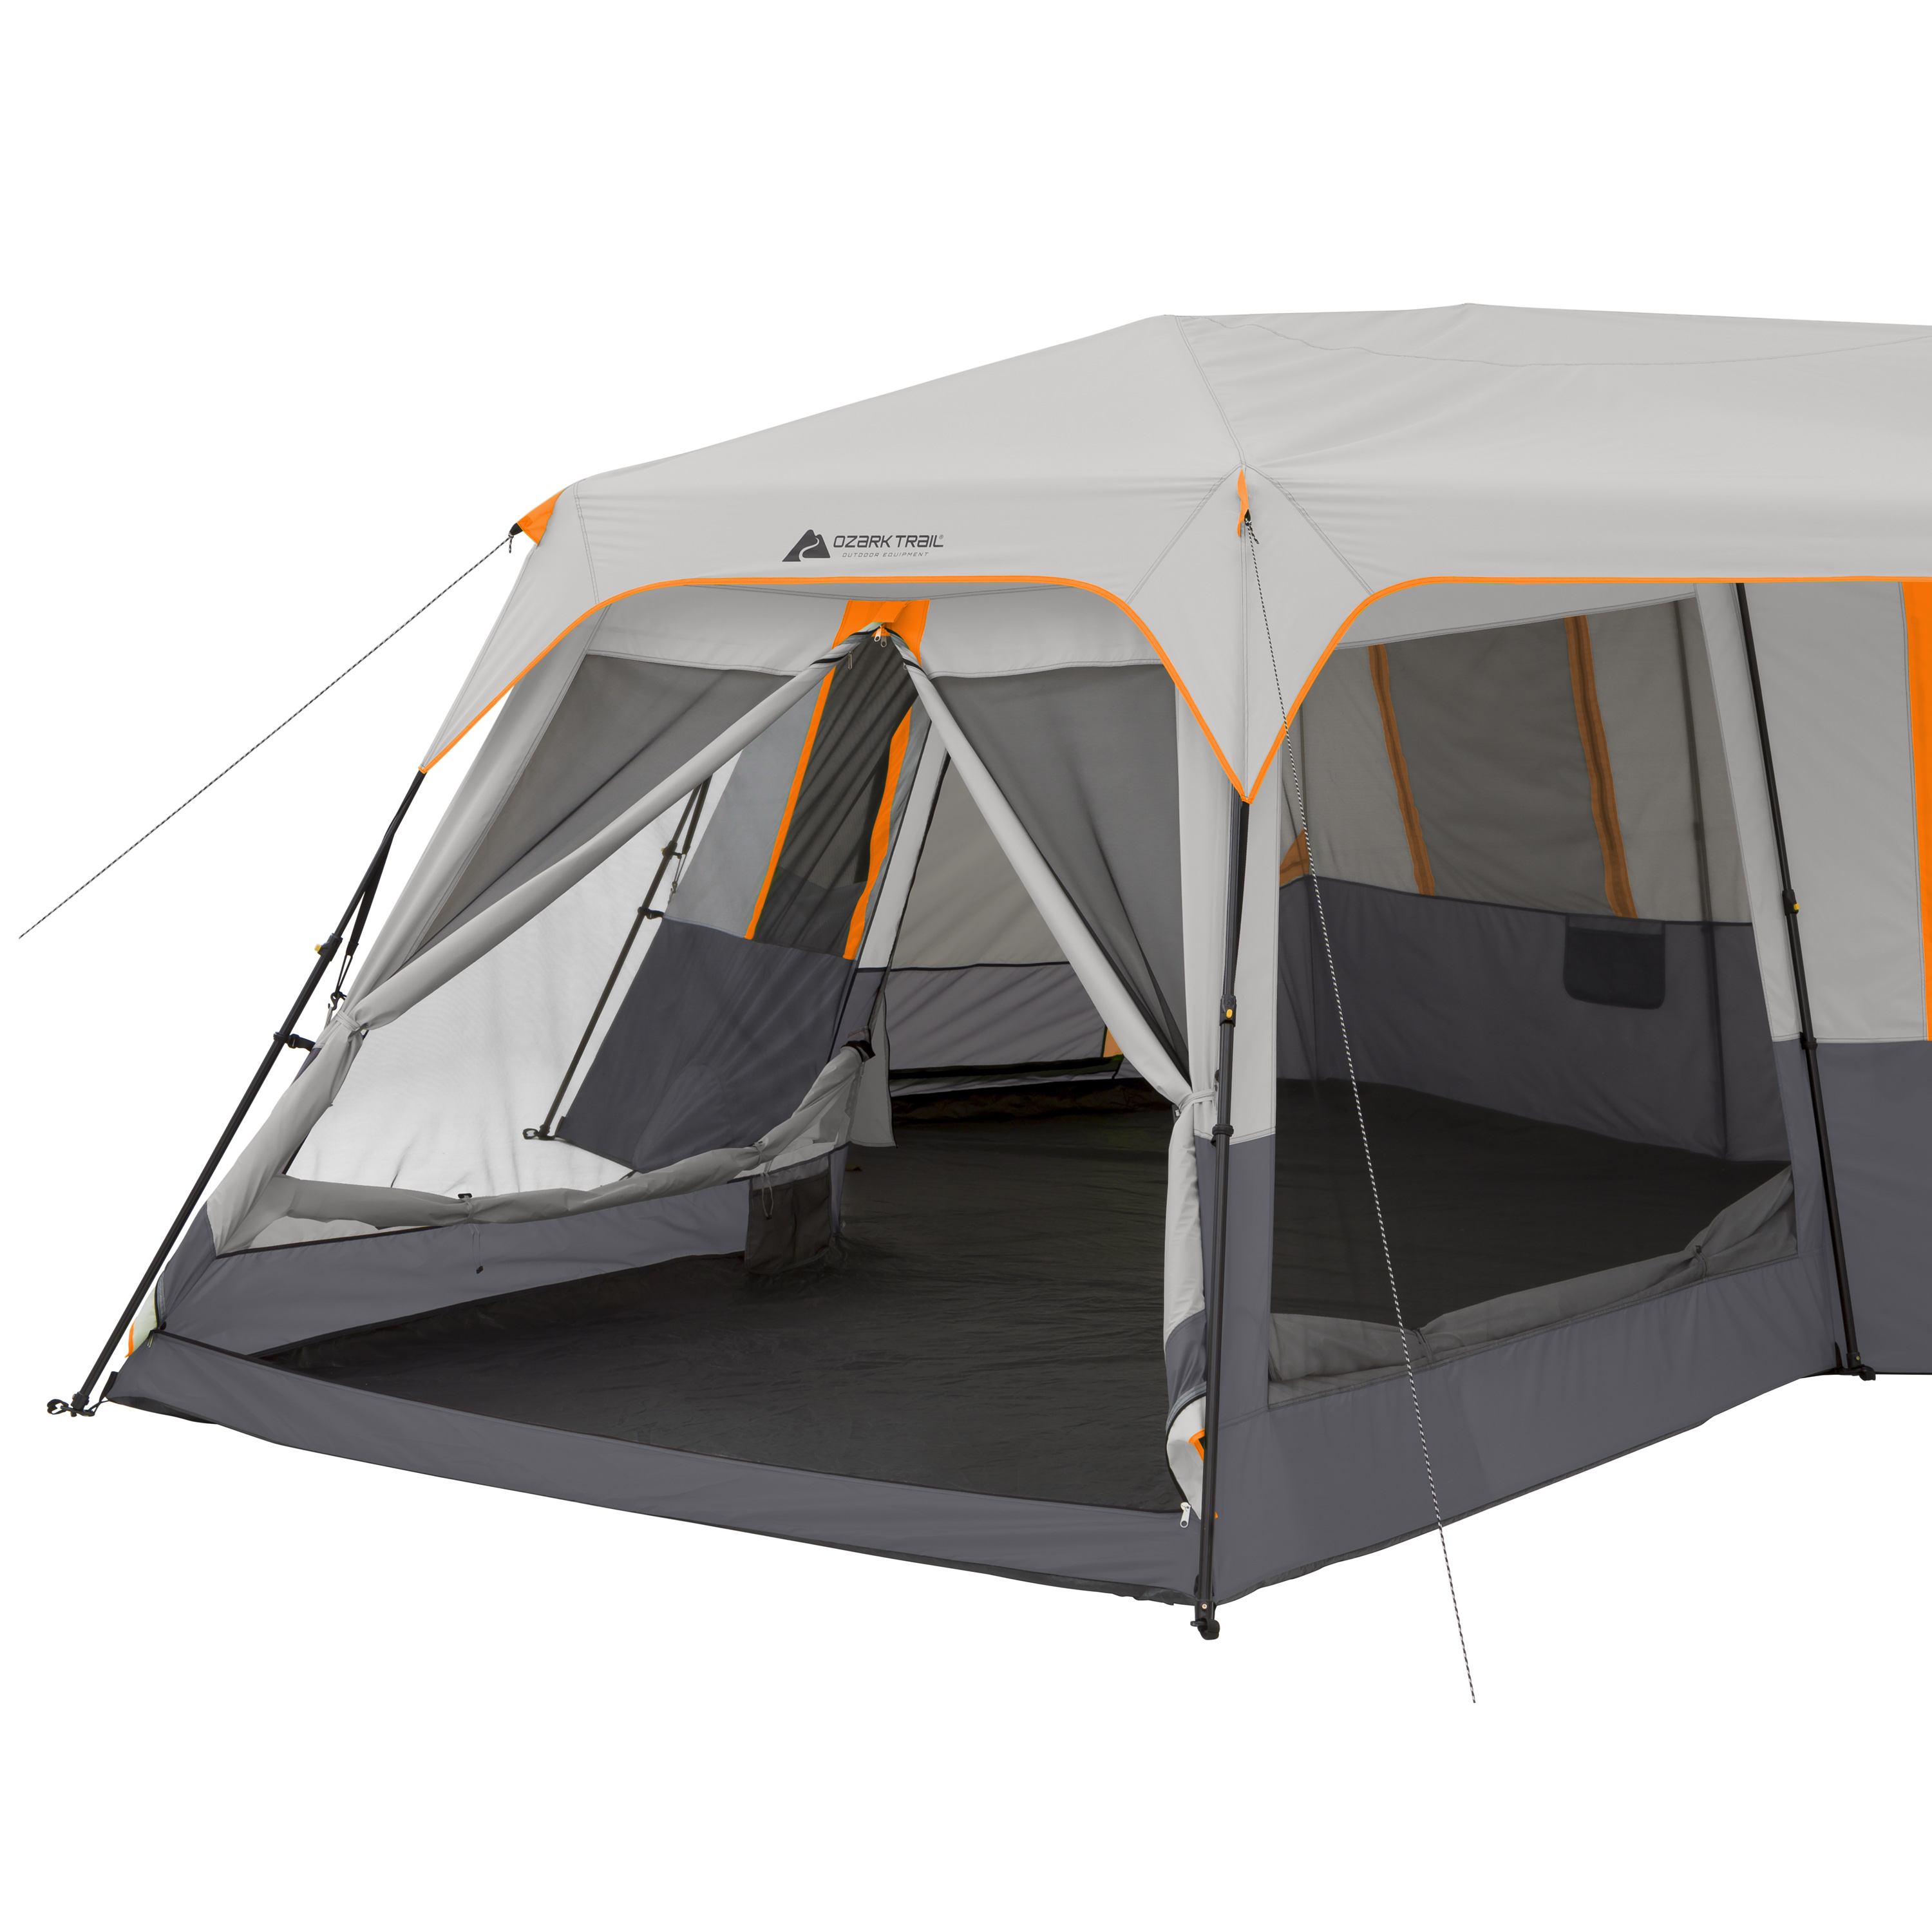 Ozark Trail 20' x 18' 12-Person 3-Room Instant Cabin Tent with Screen Room, 56.5 lbs - image 3 of 12